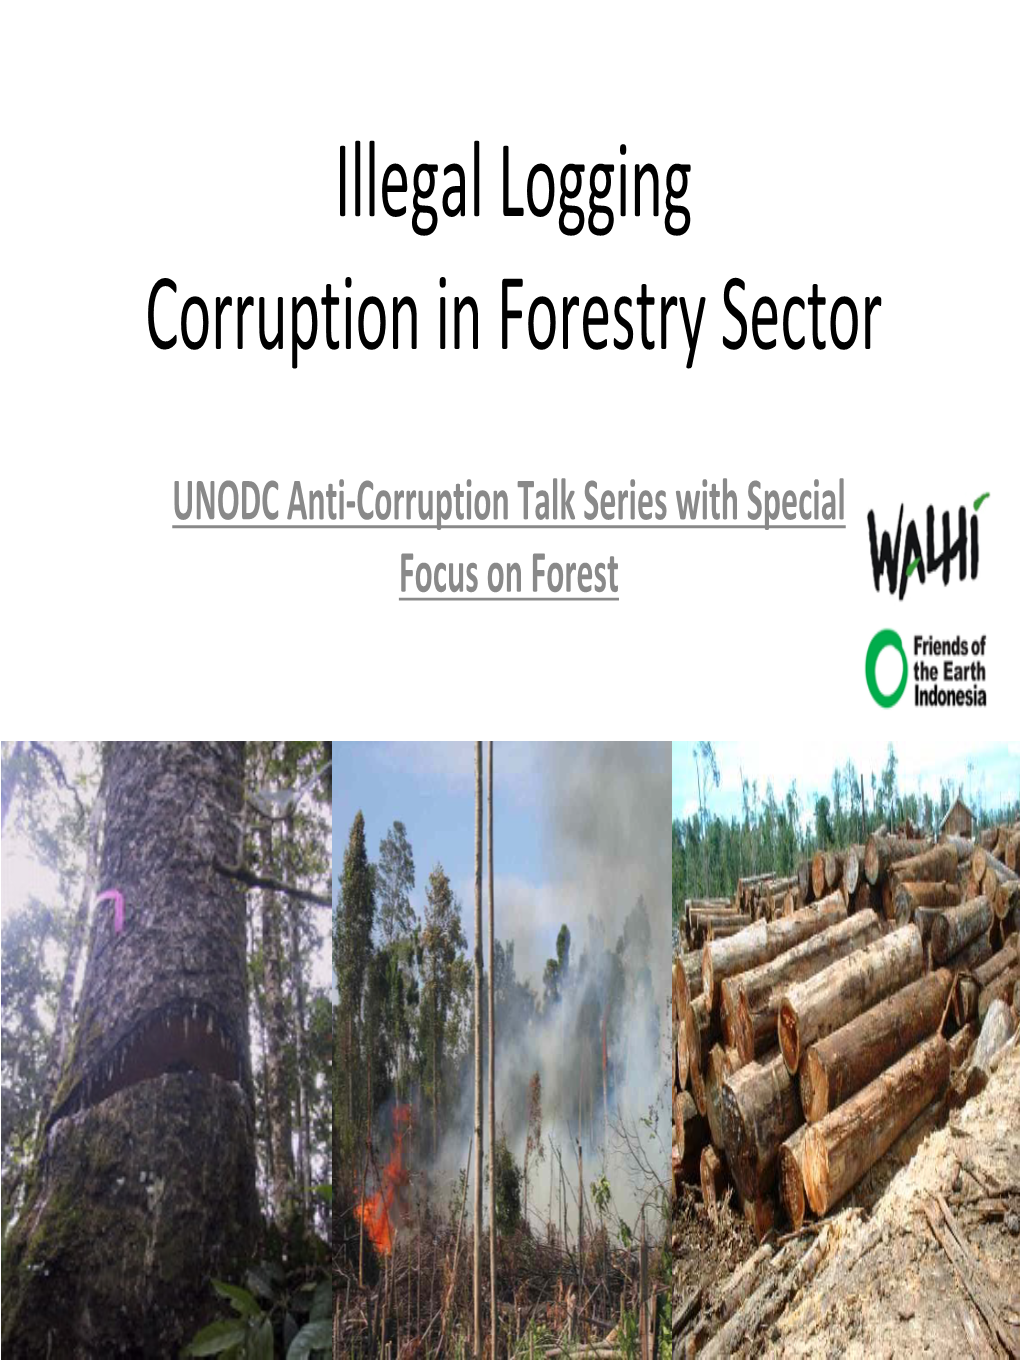 Illegal Logging Corruption in Forestry Sector